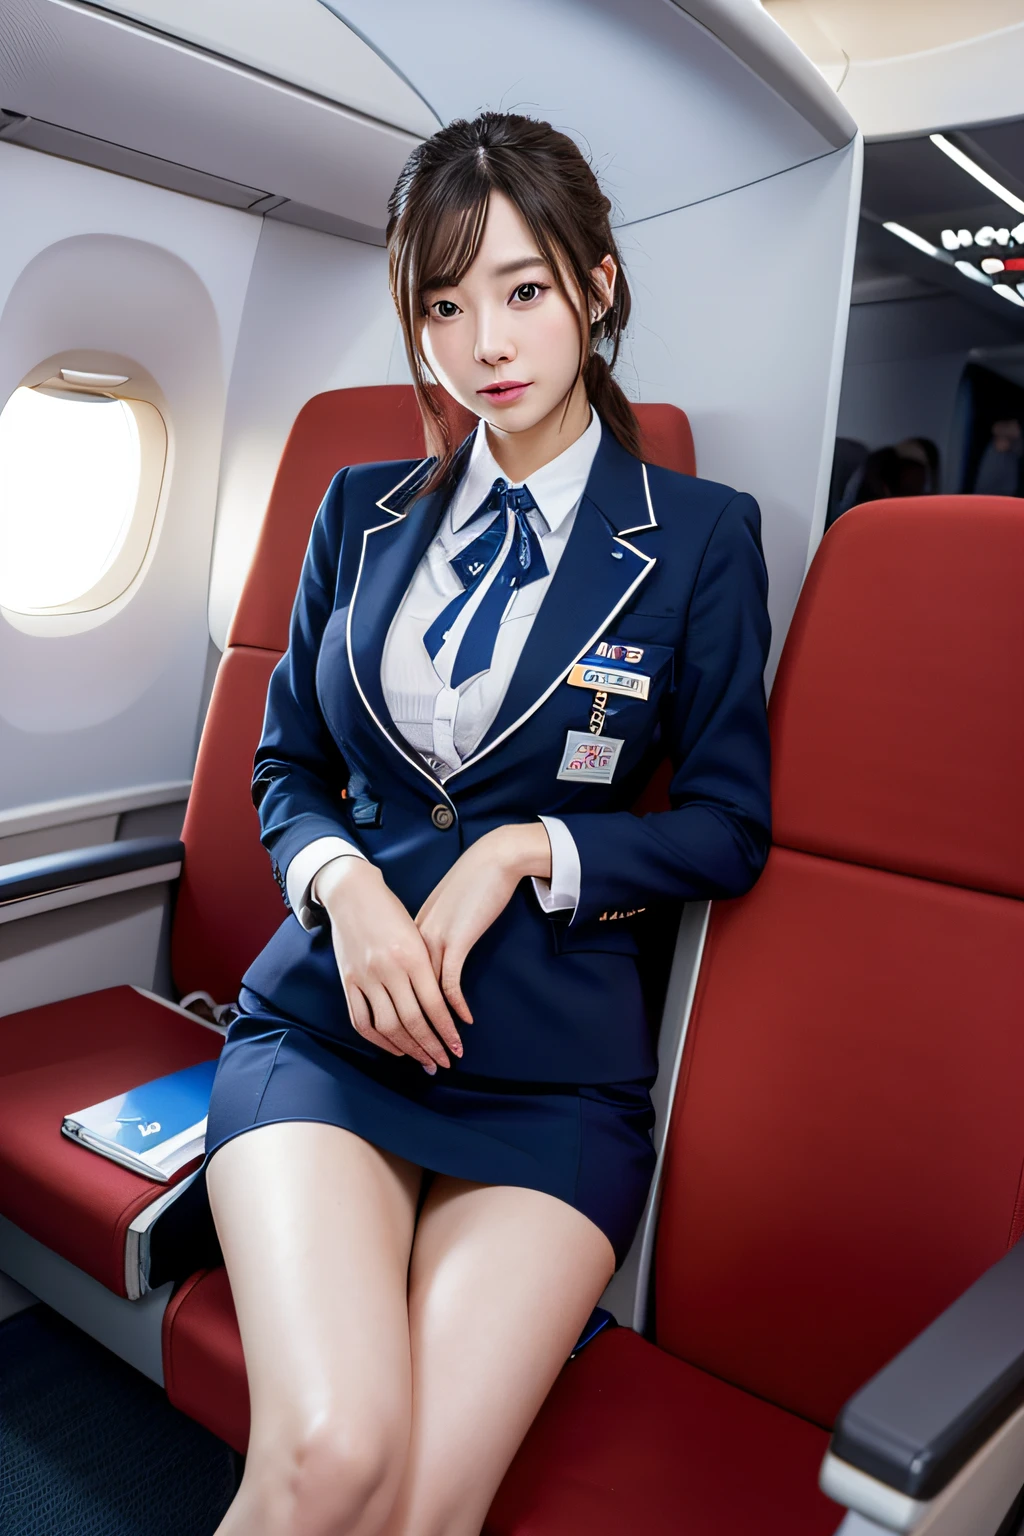 top-quality, ​masterpiece, 8K, 超A high resolution, (Photorealsitic:1.4), 1girl in、beautiful expression、symmetrical eye、shorth hair、Colossal 、Perfect body proportion、Stewardess uniform、The stewardess has、Look at viewers、(Inside the plane:1.2)、front-facing view、Shoulder、Absolute area(1.3)、Looks fun、NSFW、